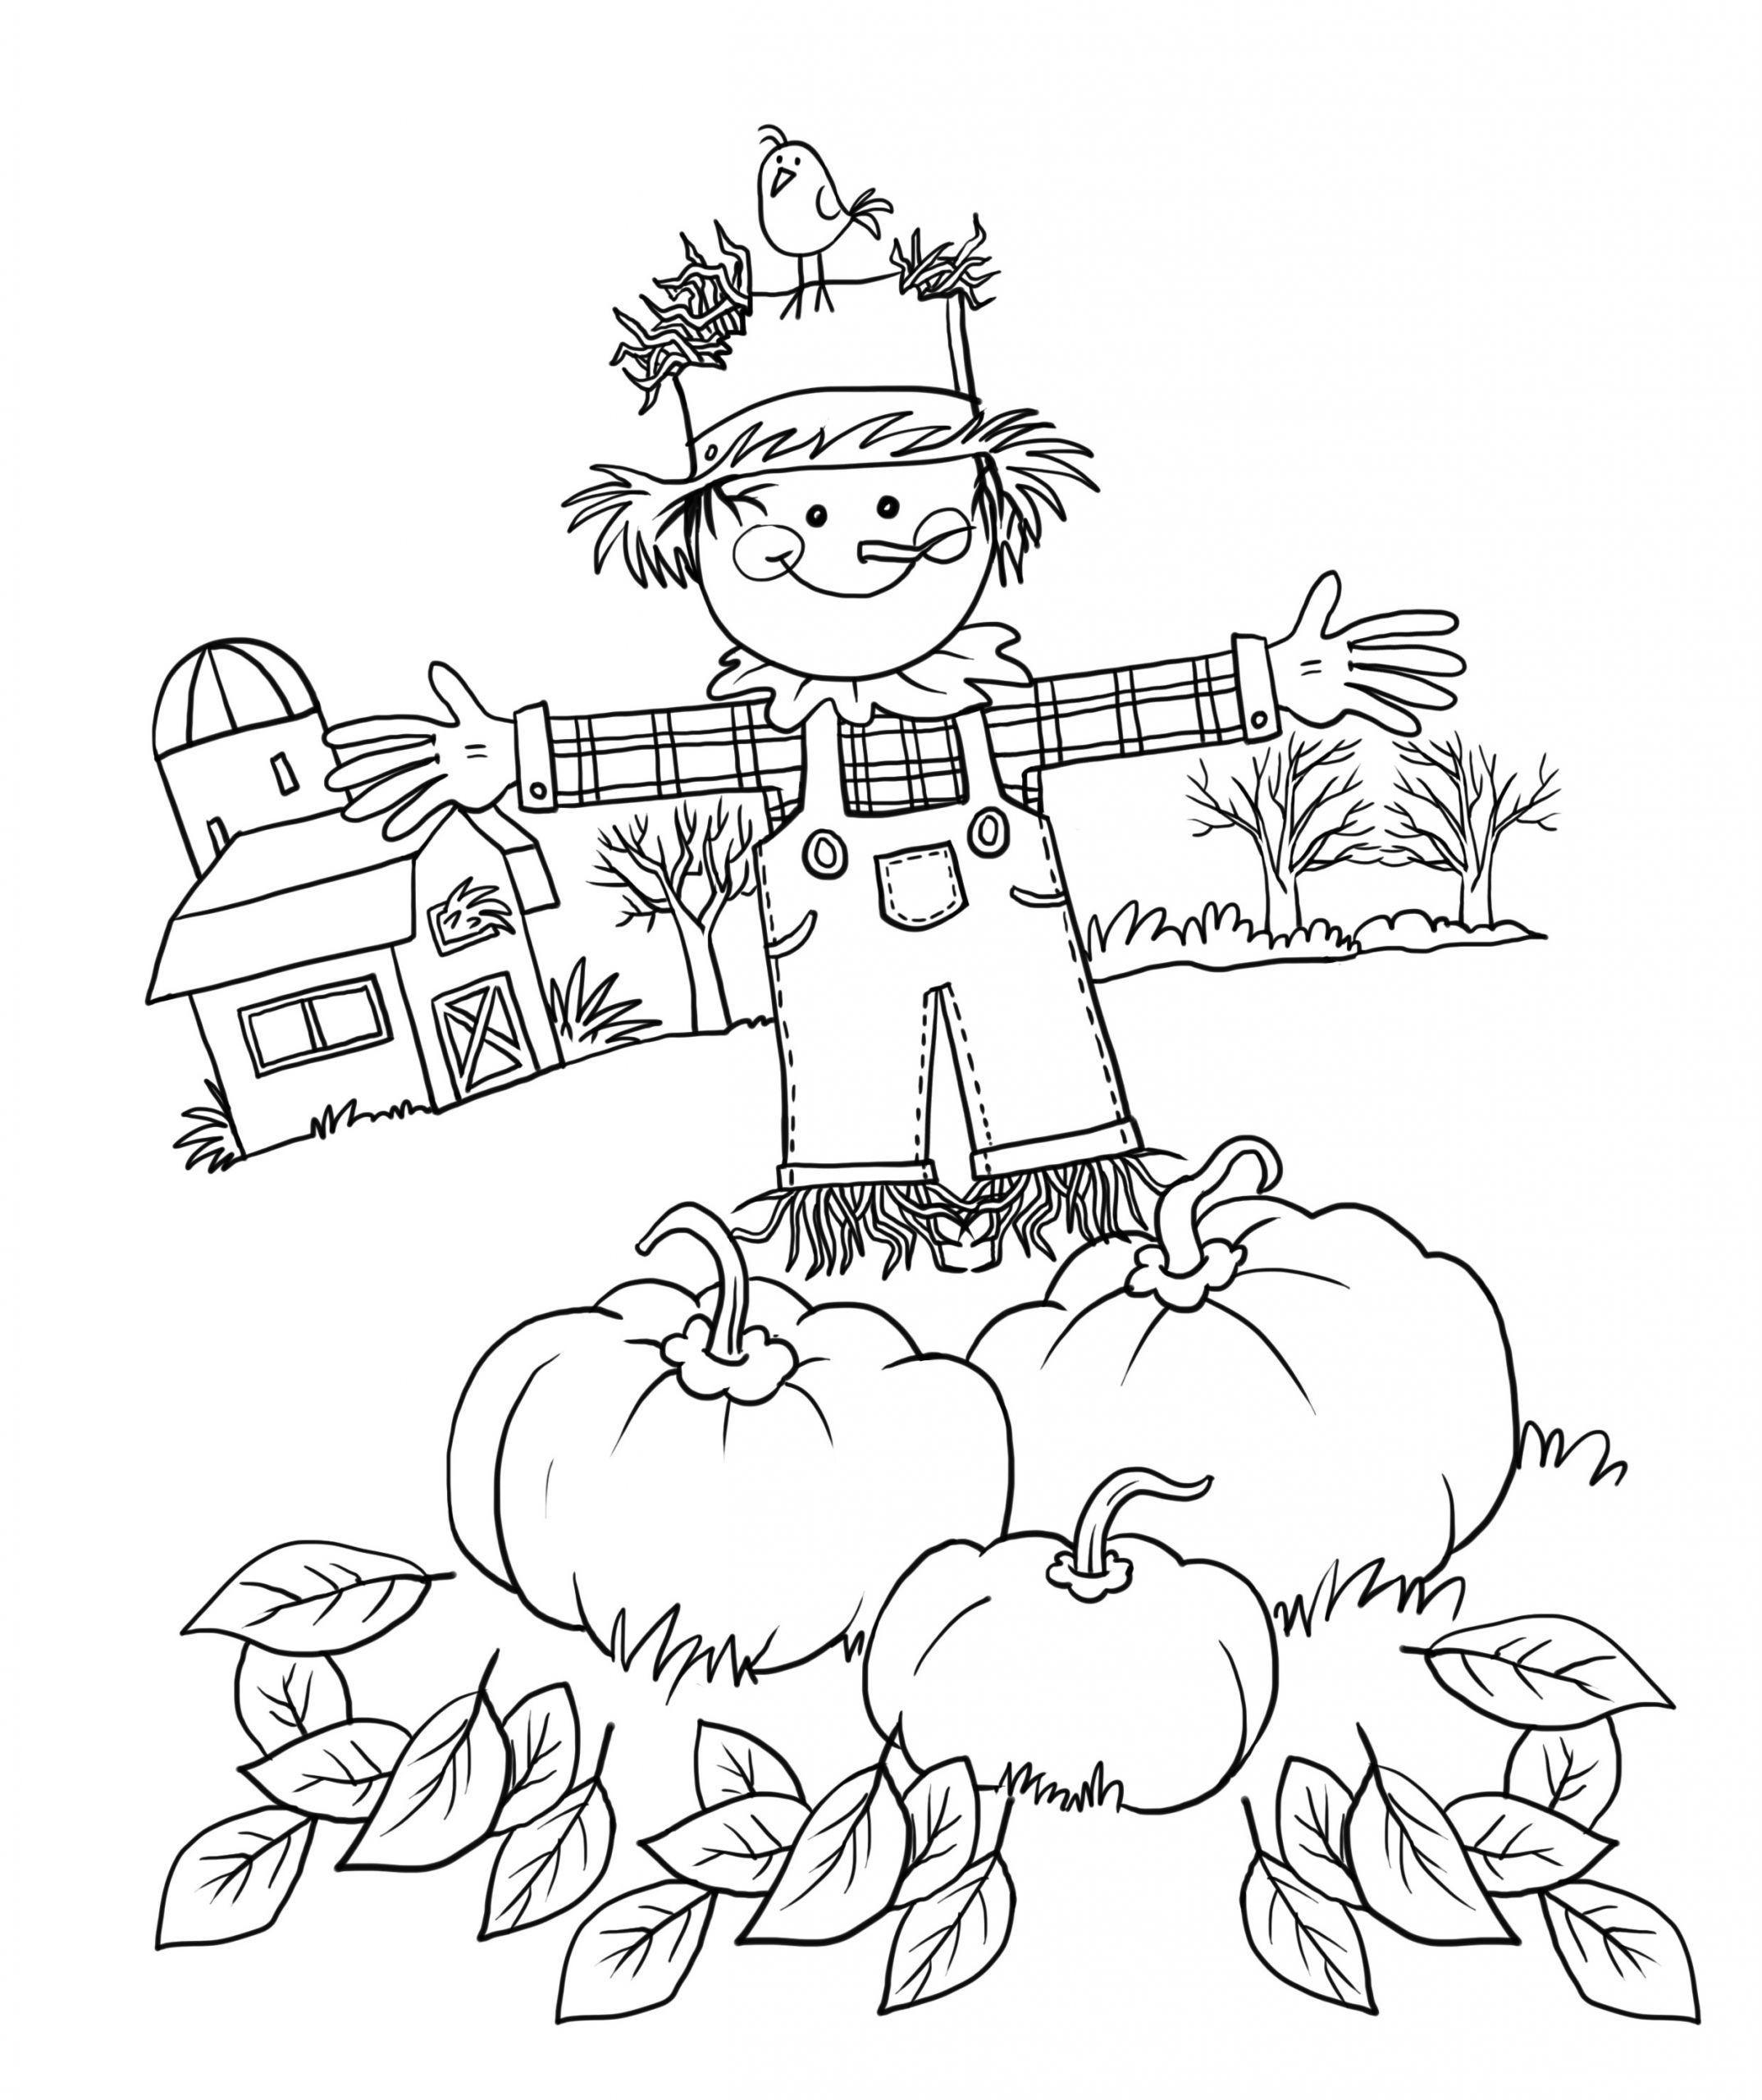 Coloring Pages For Kids Fall
 Fall Coloring Pages